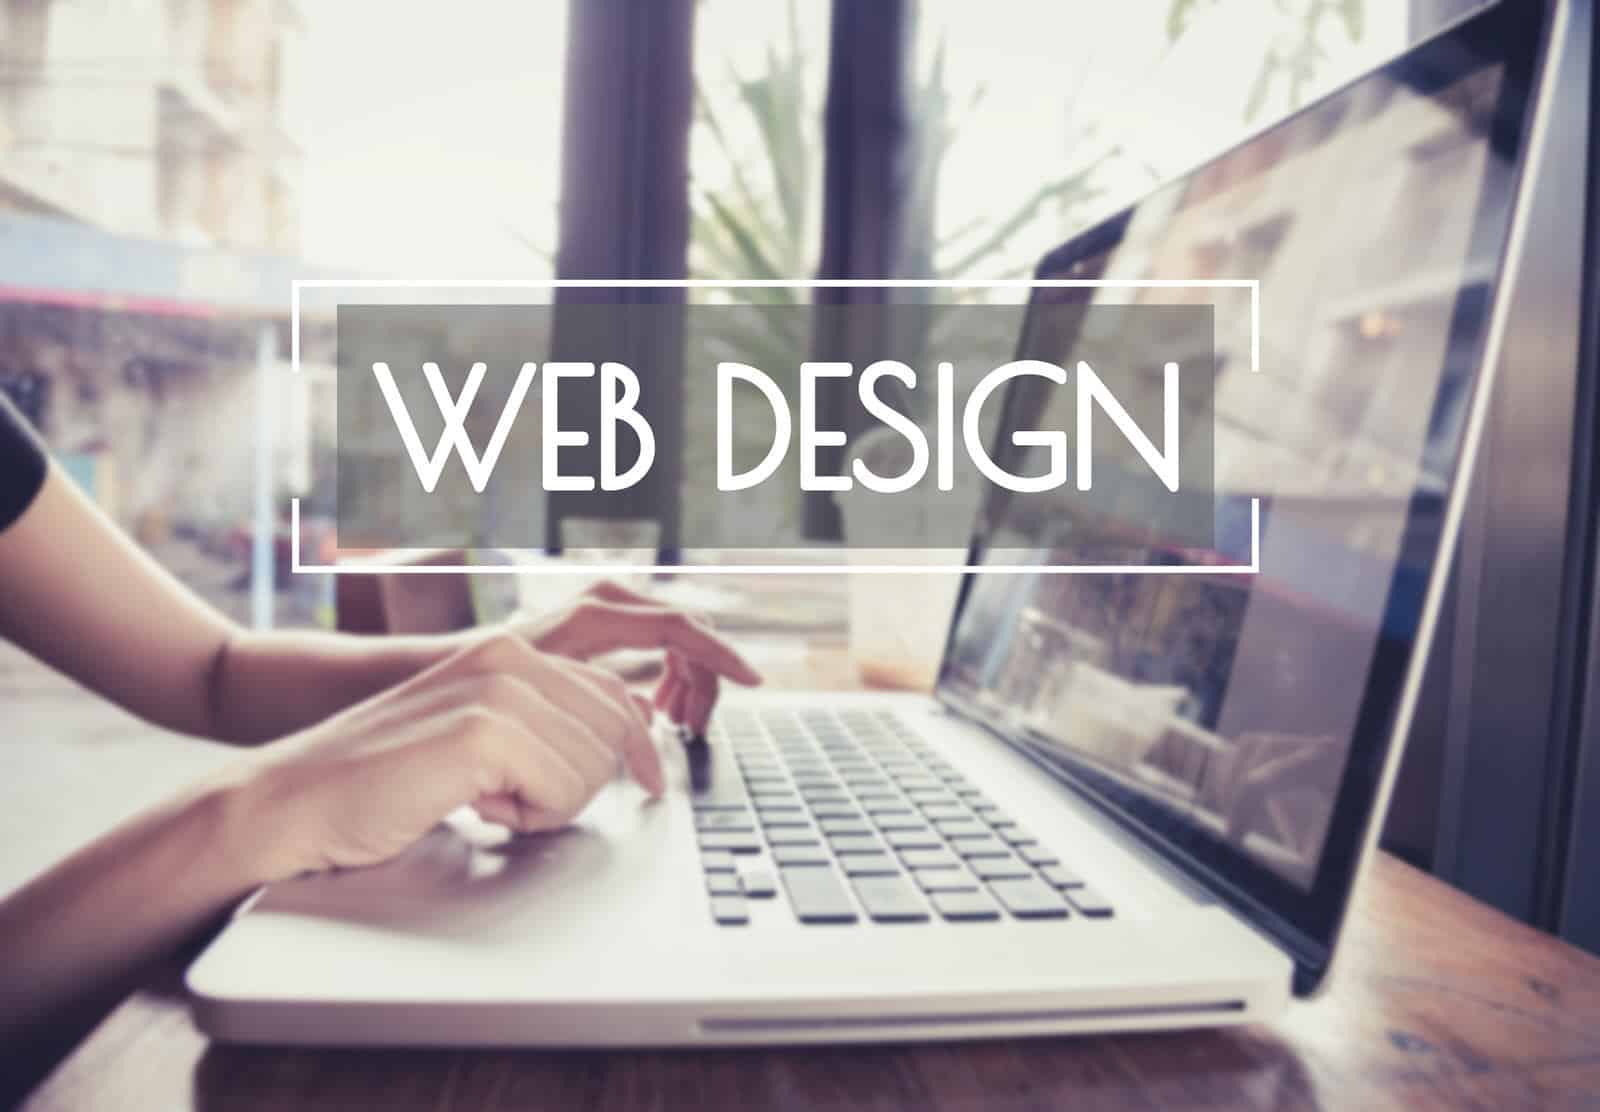 3 Tips to Boost Your Website Design - Designs By Dave O